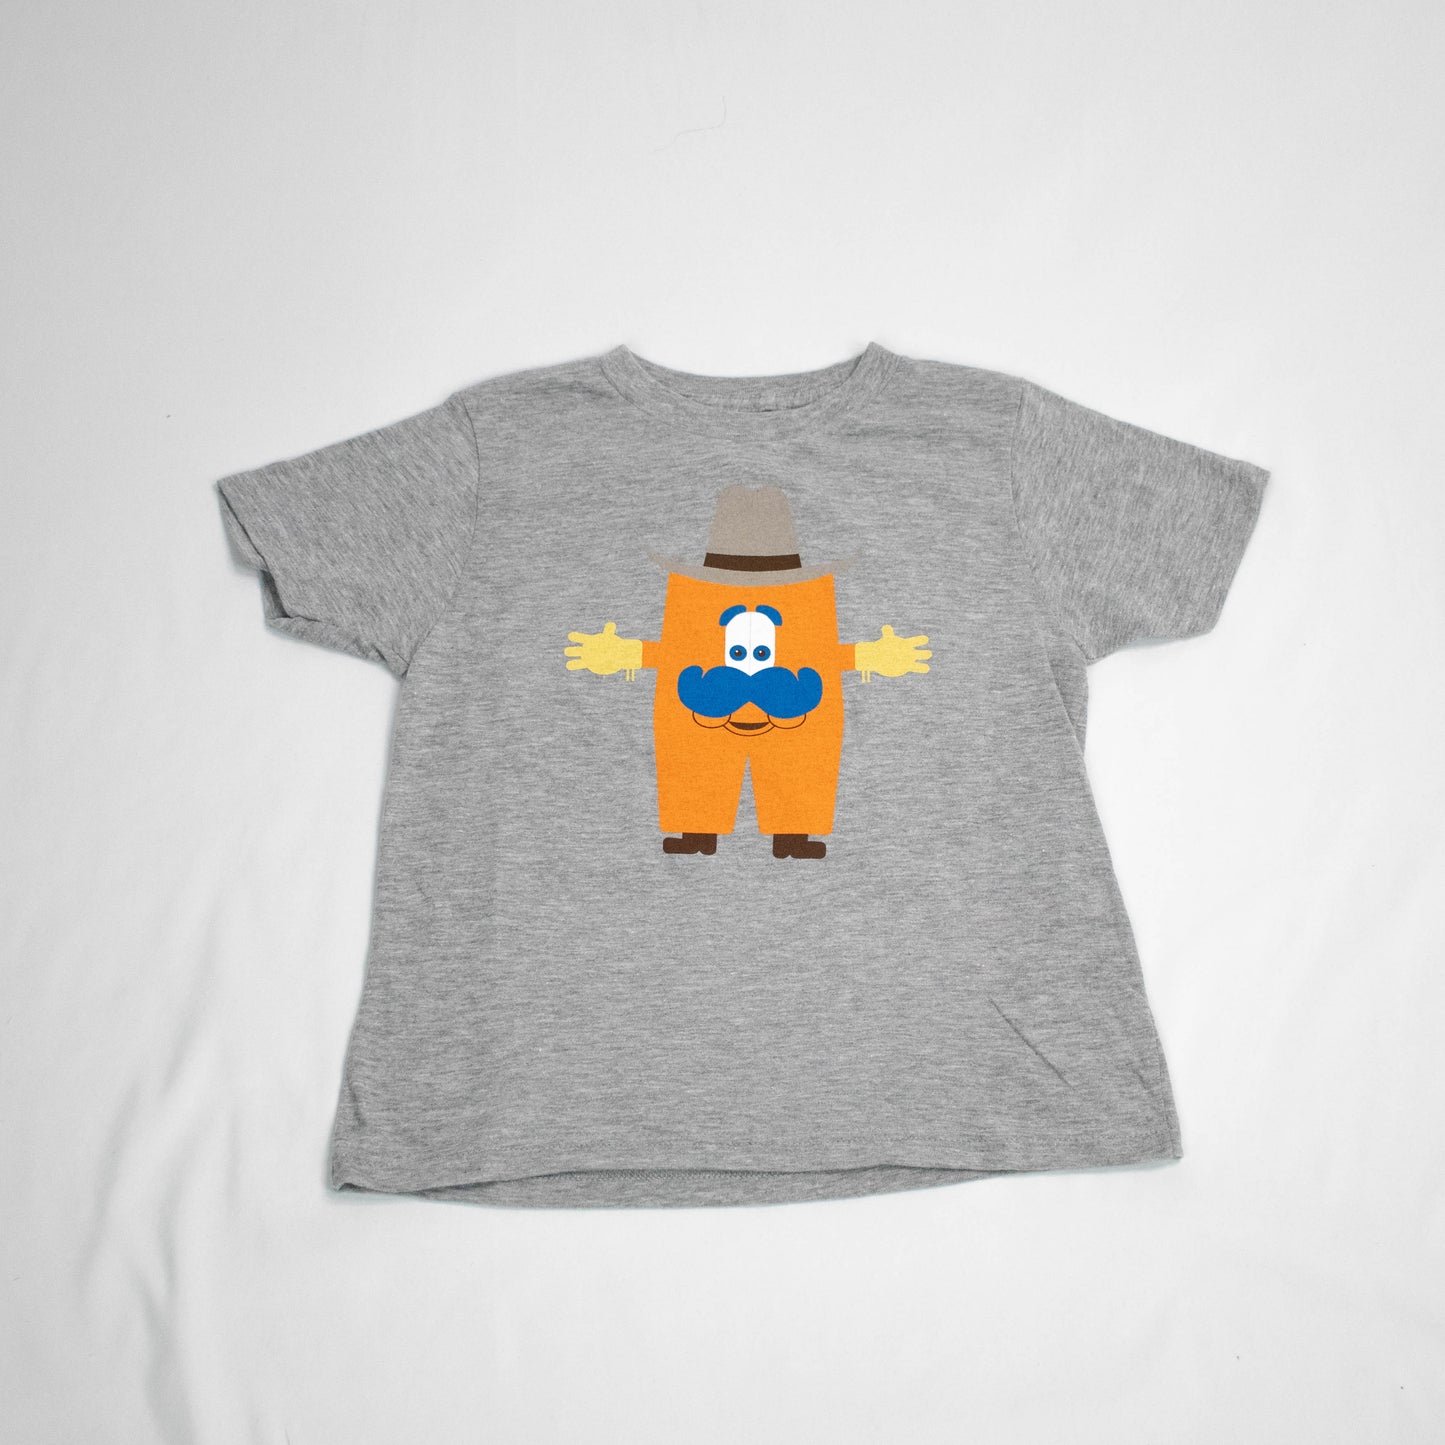 Howdy Toddler Tee